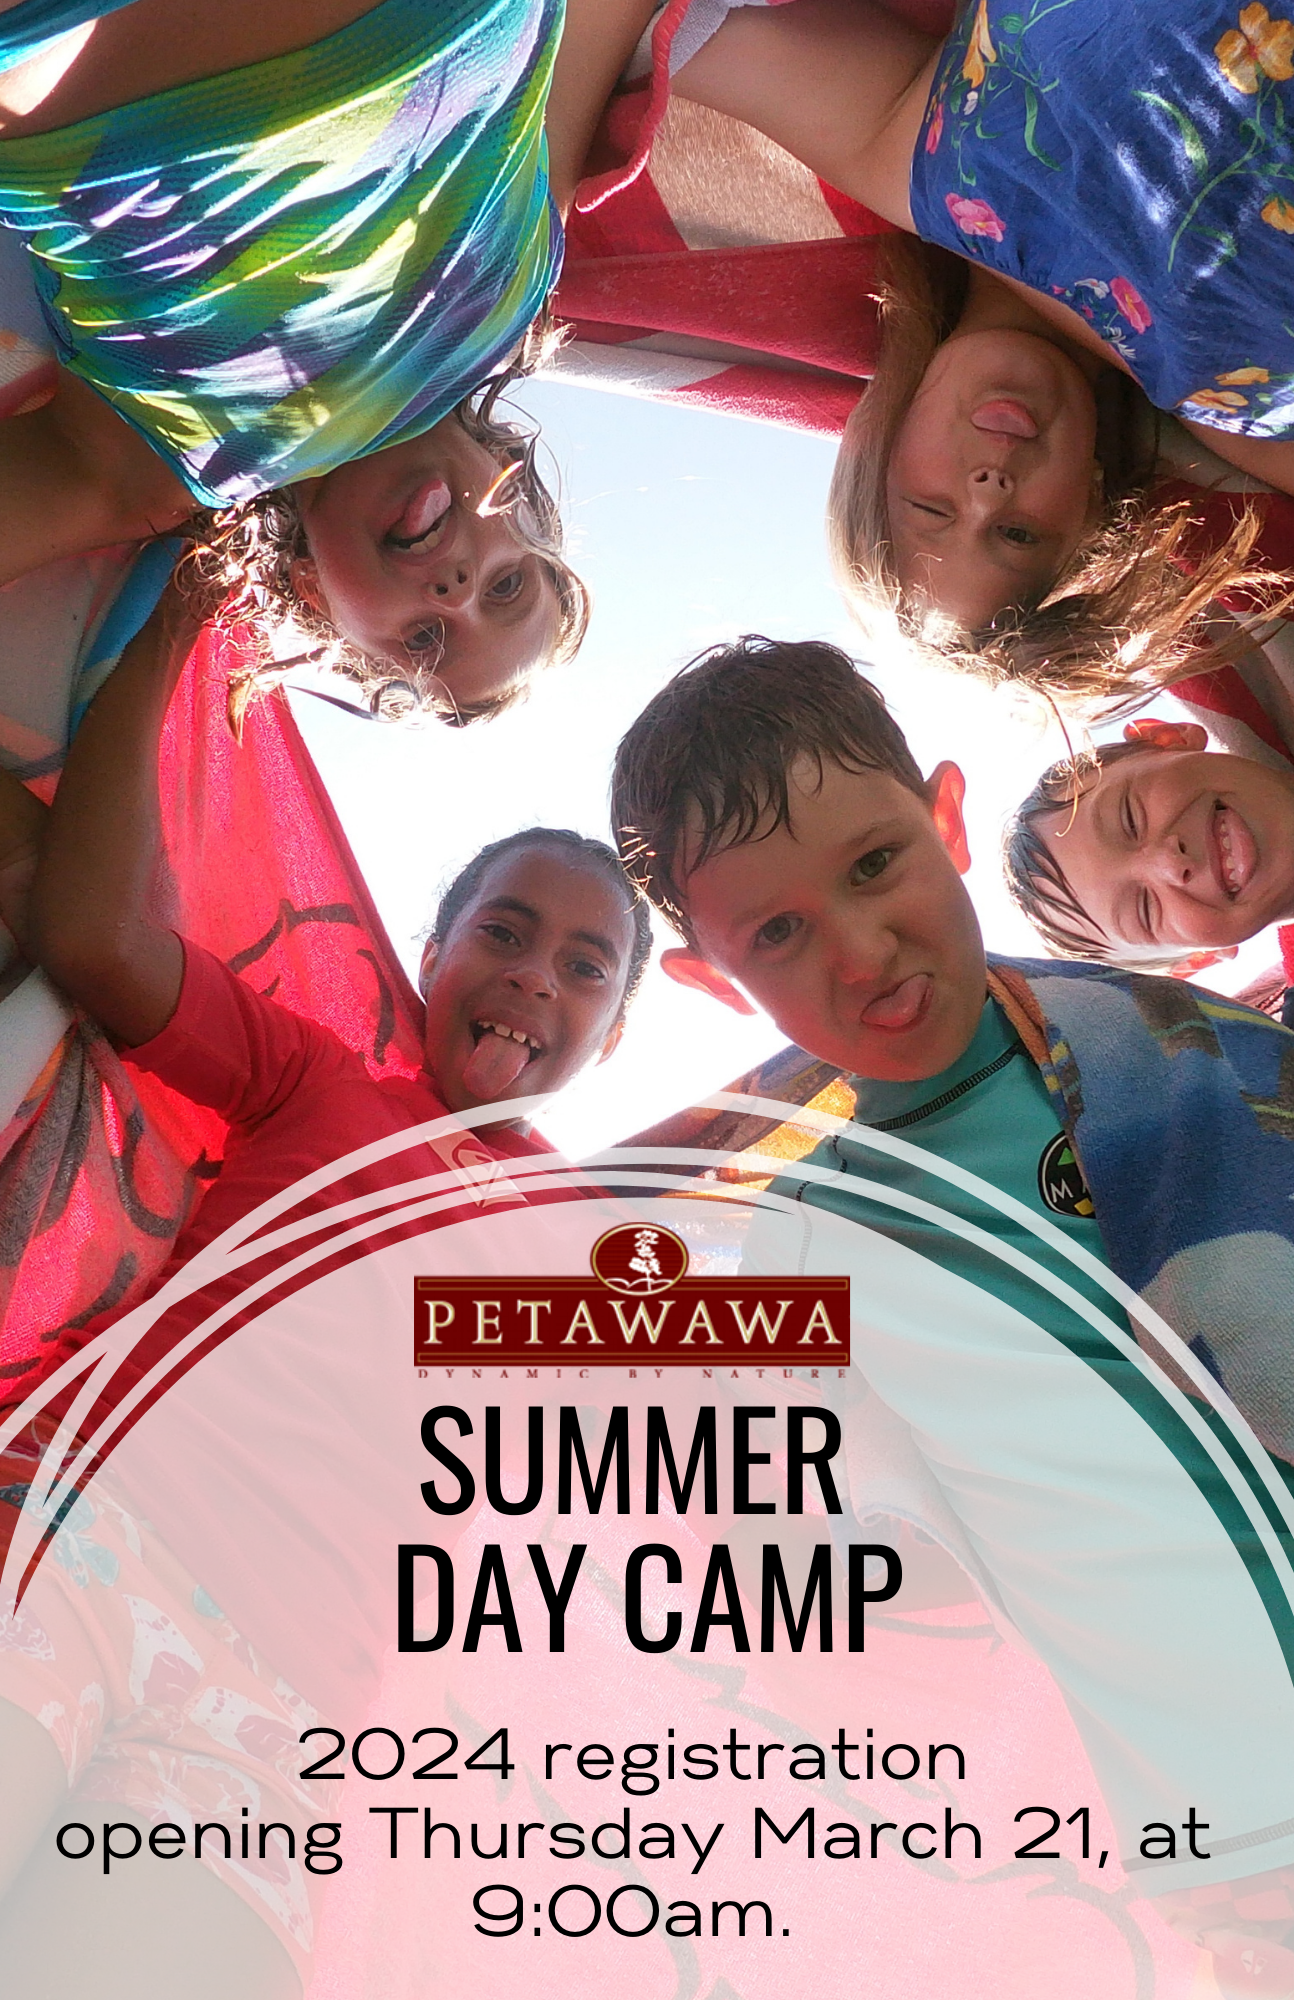 Summer Day Camp Photo 2023 registration opening Monday, March 20